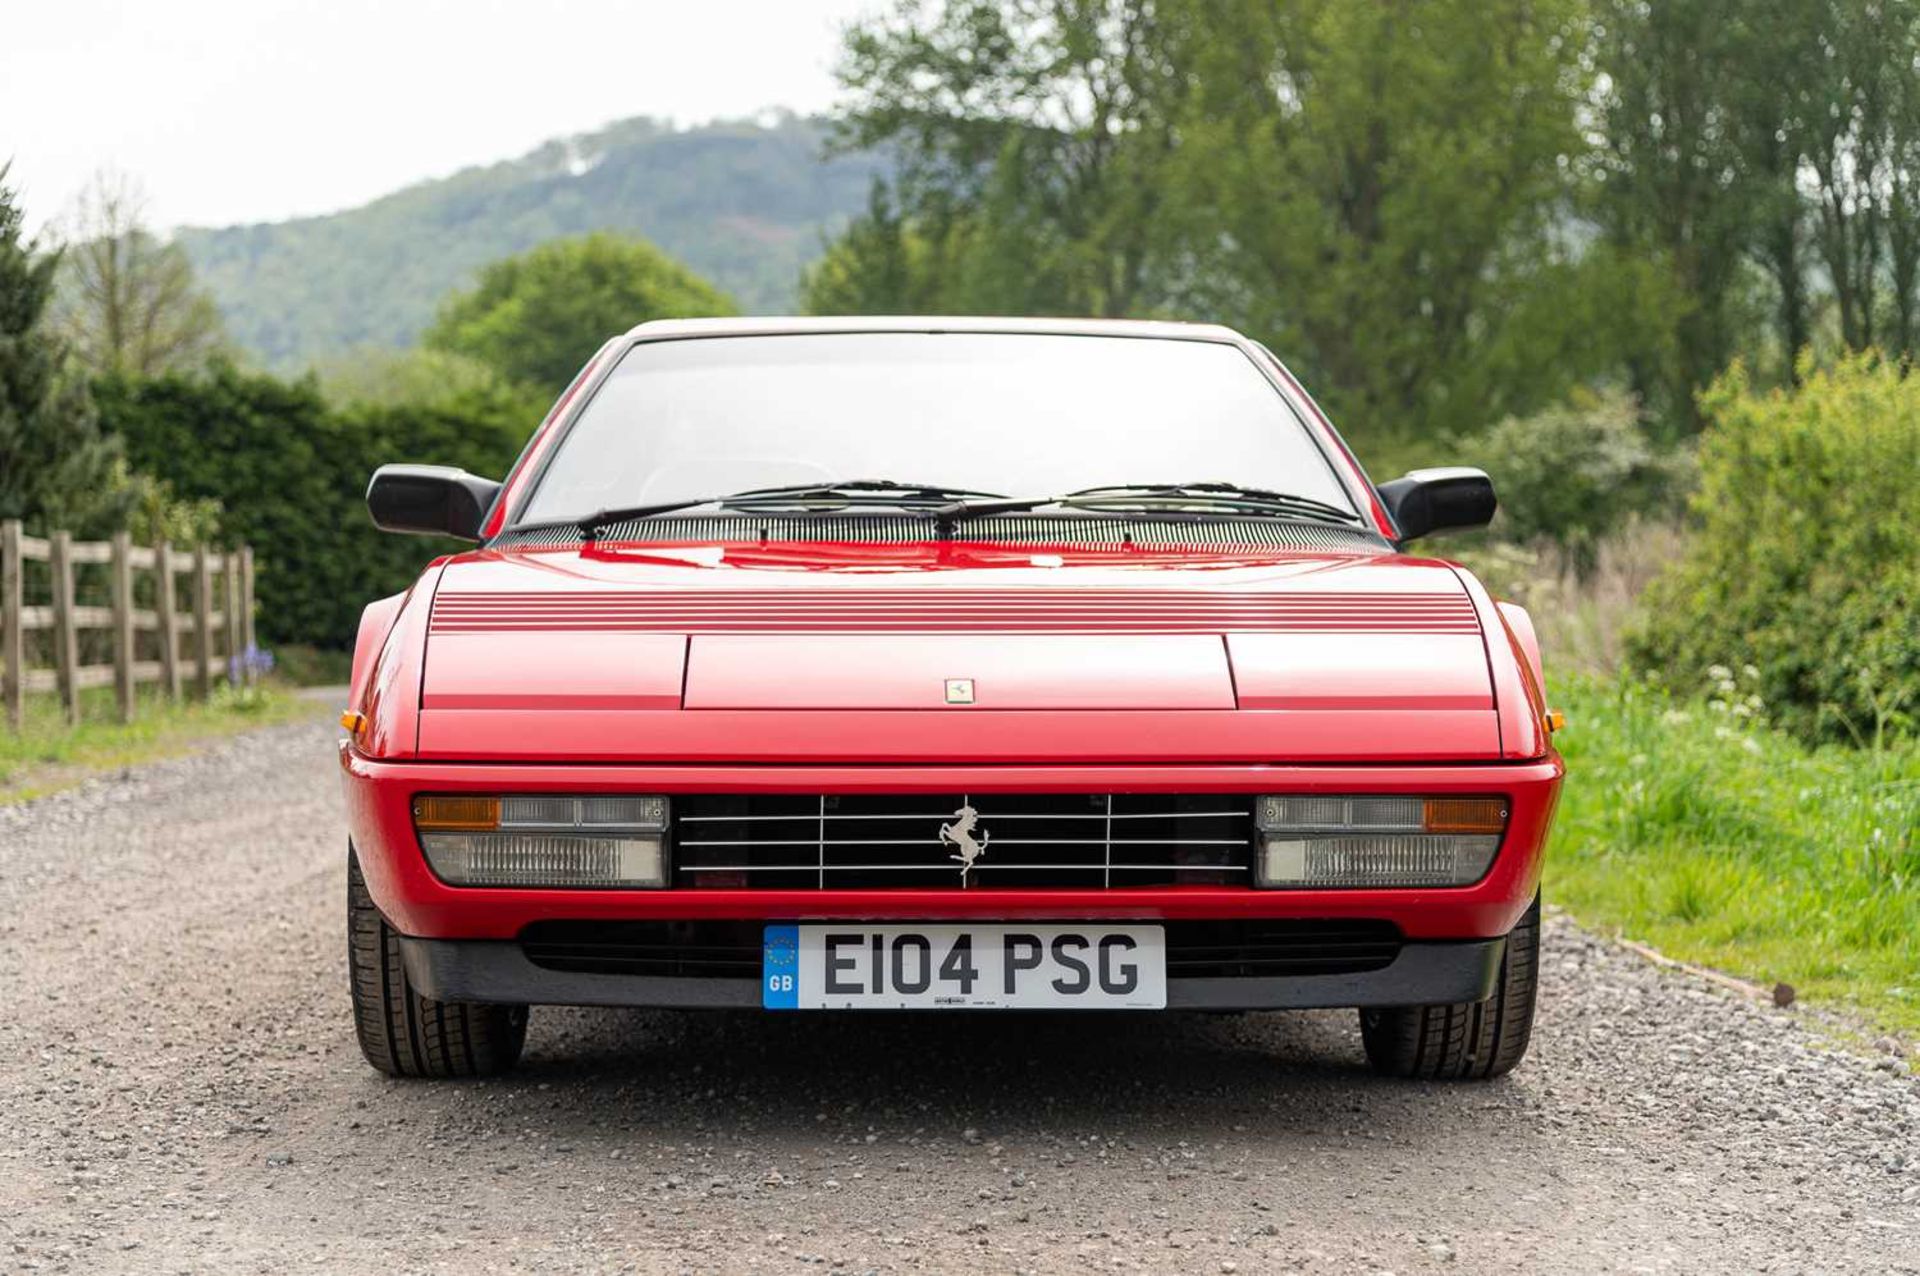 1988 Ferrari Mondial QV ***NO RESERVE*** Remained in the same ownership for nearly two decades finis - Image 3 of 91